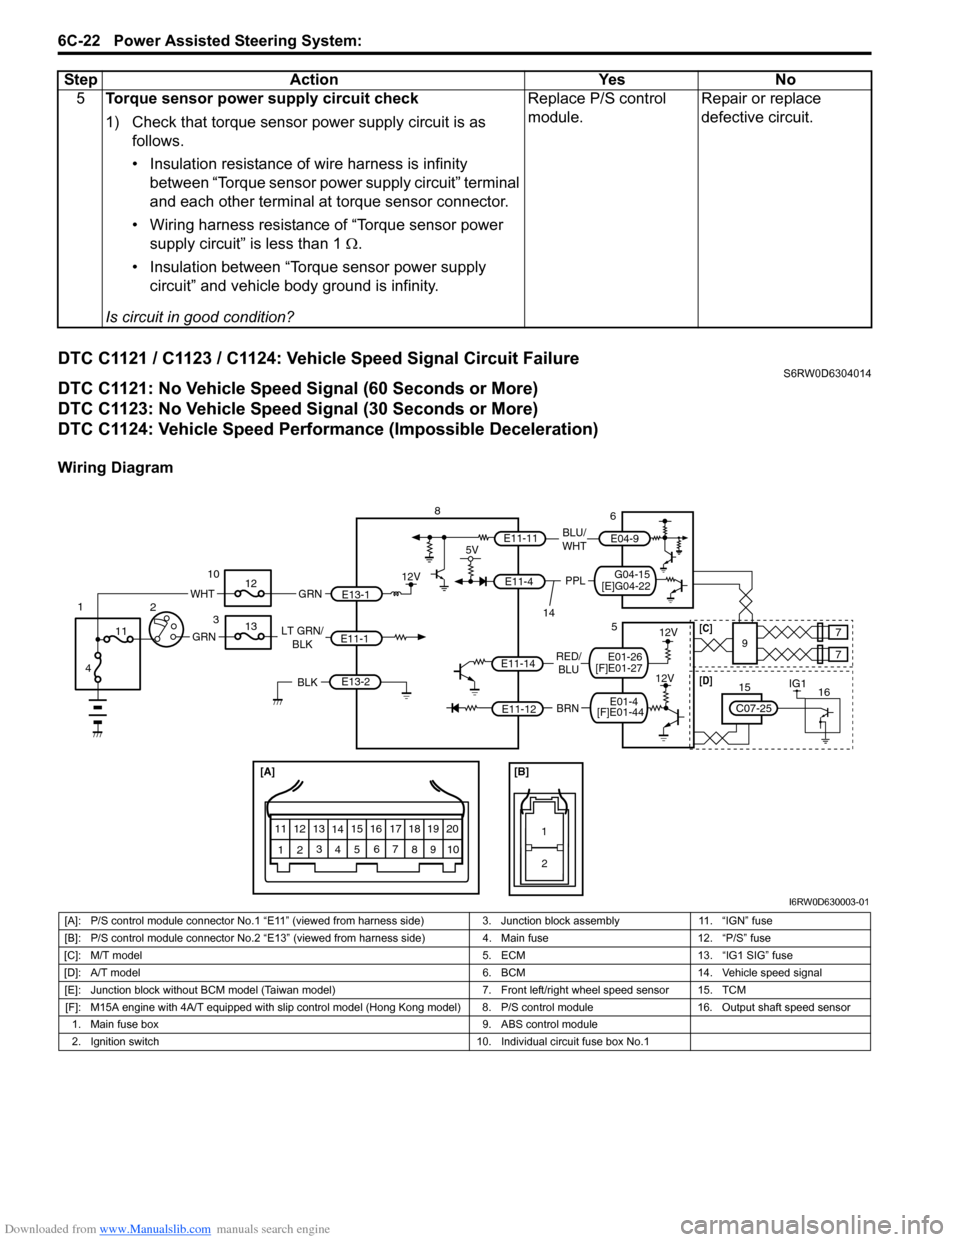 SUZUKI SX4 2006 1.G Service Workshop Manual Downloaded from www.Manualslib.com manuals search engine 6C-22 Power Assisted Steering System: 
DTC C1121 / C1123 / C1124: Vehicle Speed Signal Circuit FailureS6RW0D6304014
DTC C1121: No Vehicle Speed